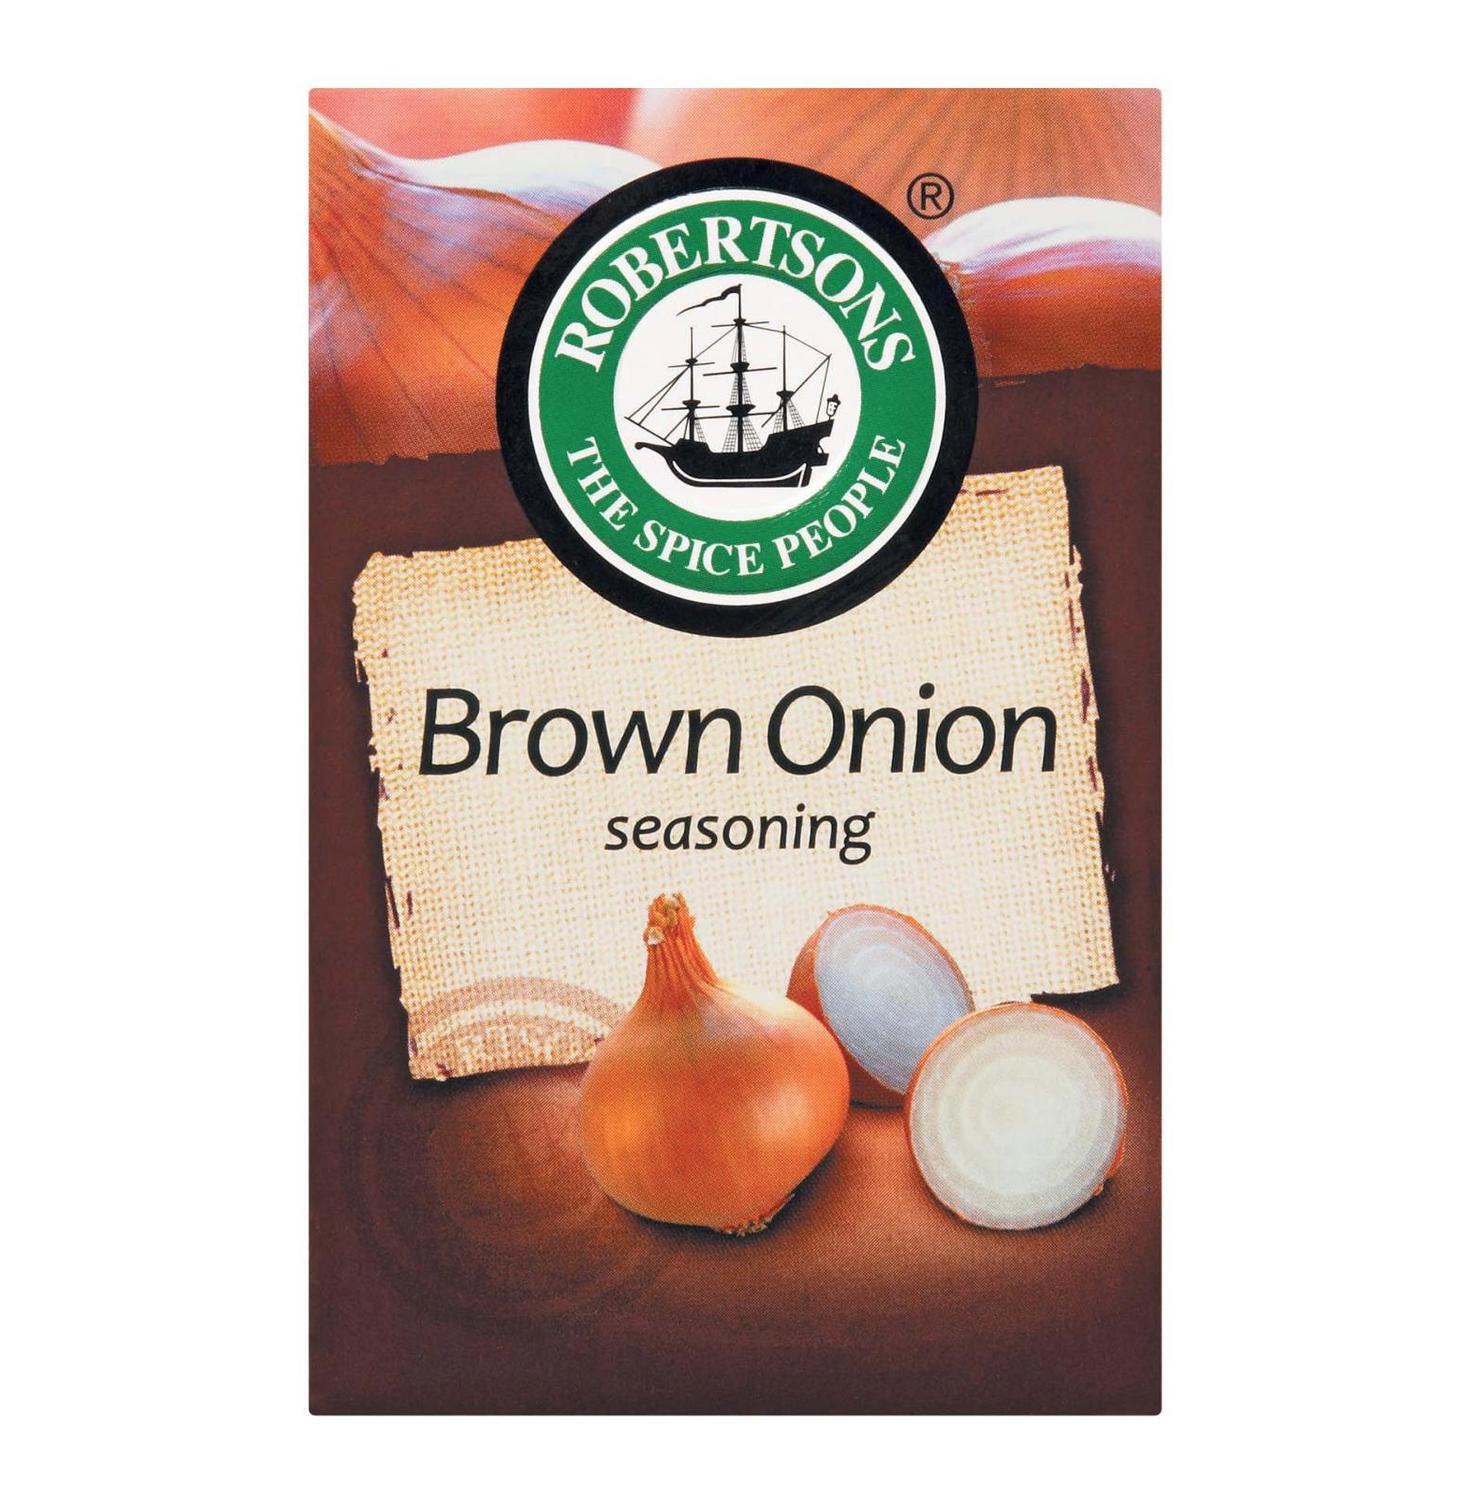 ROBERTSONS Seasoning Brown Onion (1 x 80g) - Lowest Prices ...